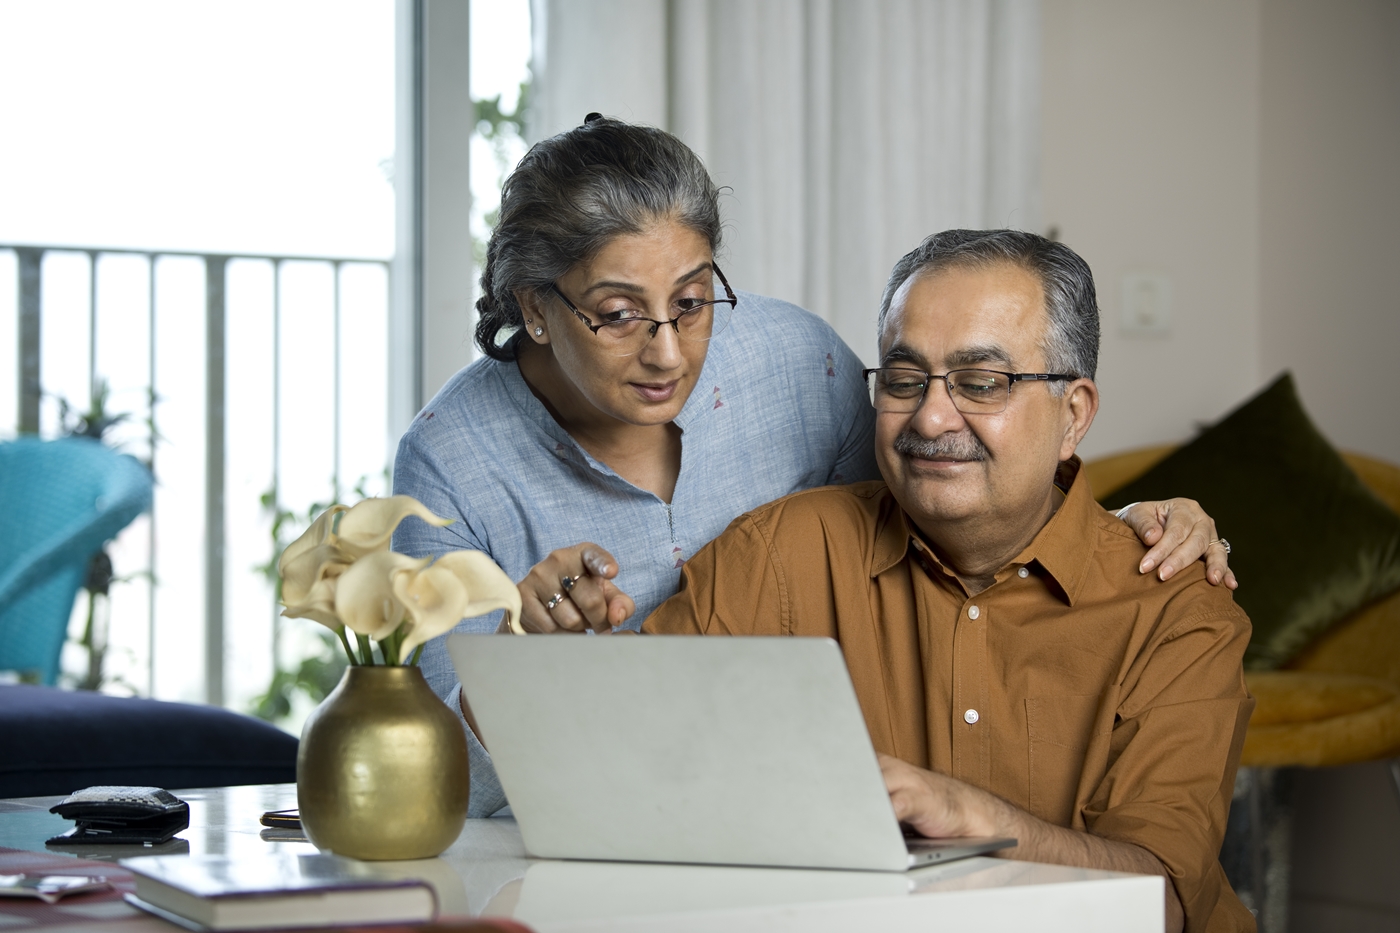 Canadians want to age in place and are turning to reverse mortgages to make that happen